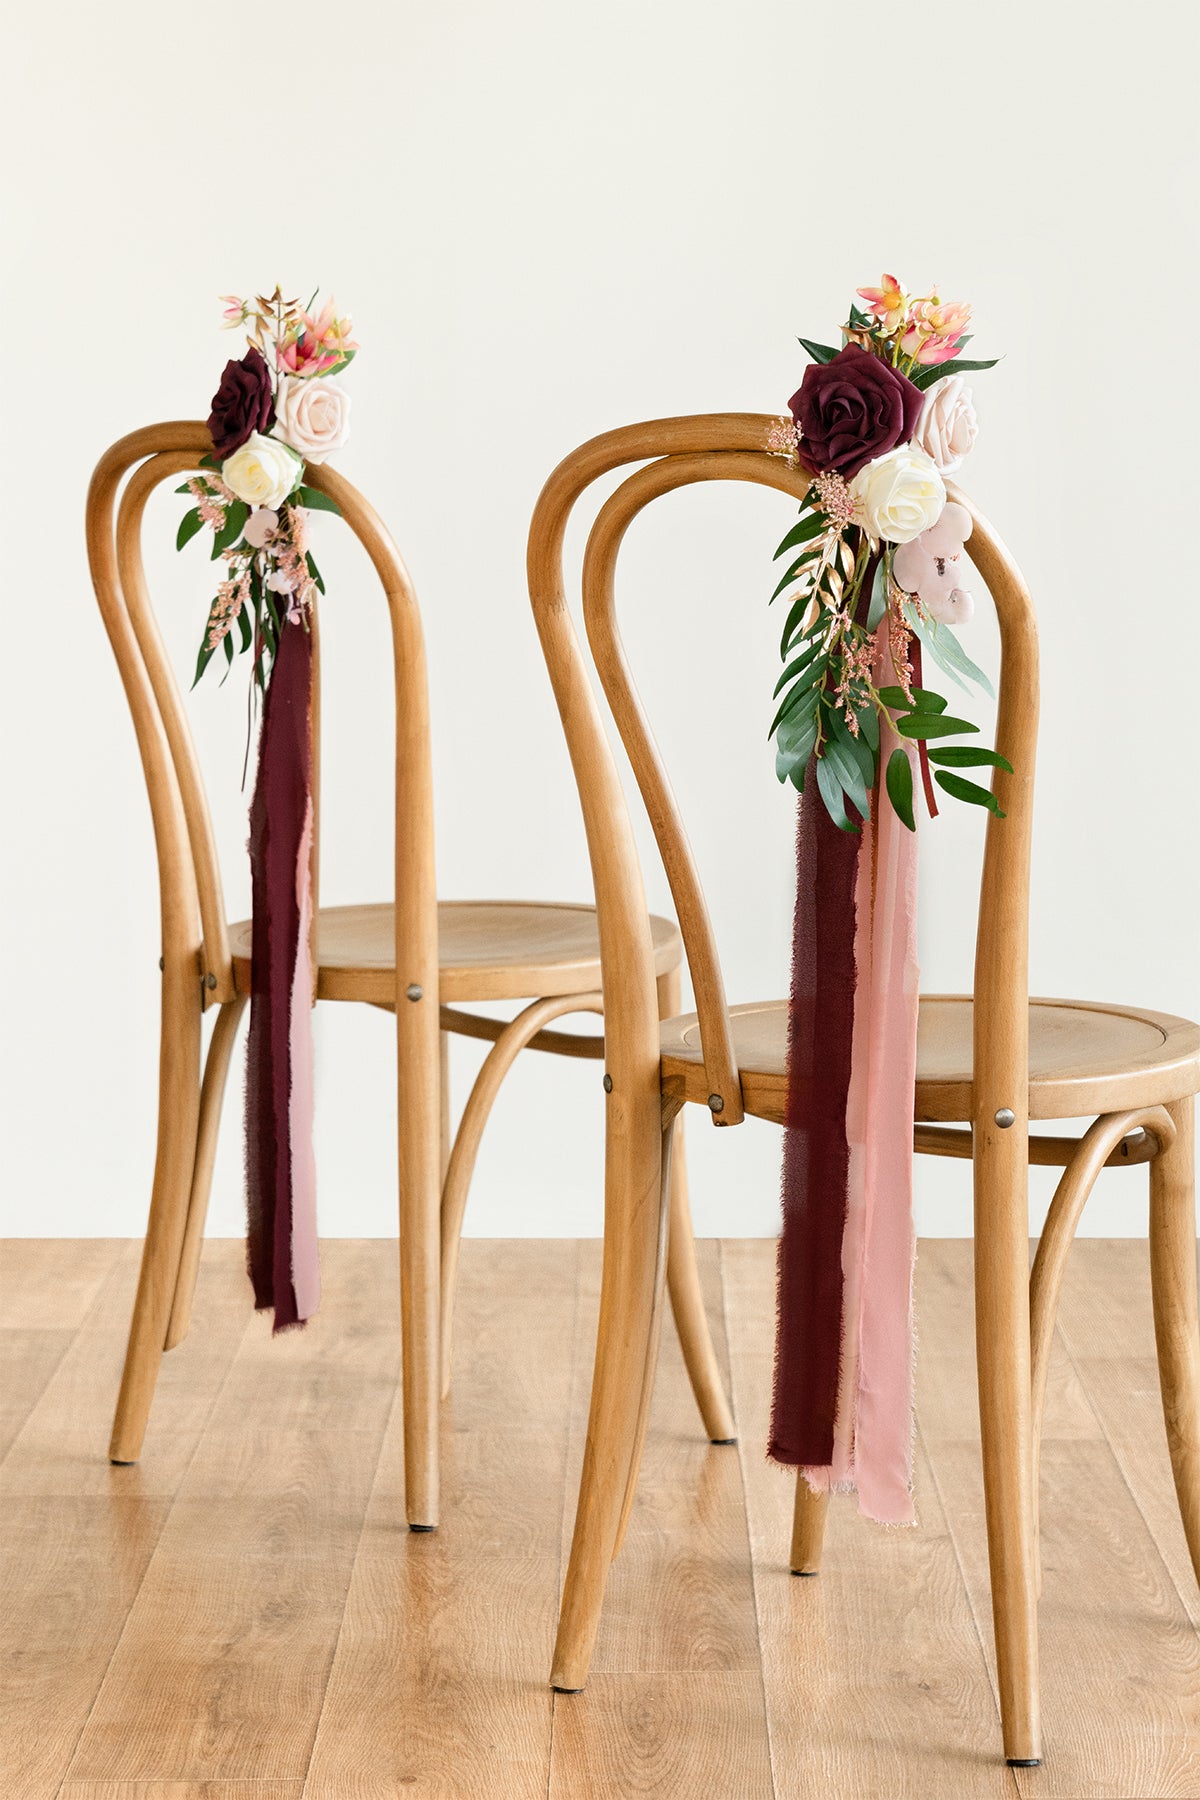 Ling's Moment Aisle Pew Artificial Flowers Arrangement for Wedding Ceremony Chair Back Floral Decorations with Chiffon Ribbon Marsala Blush Pink